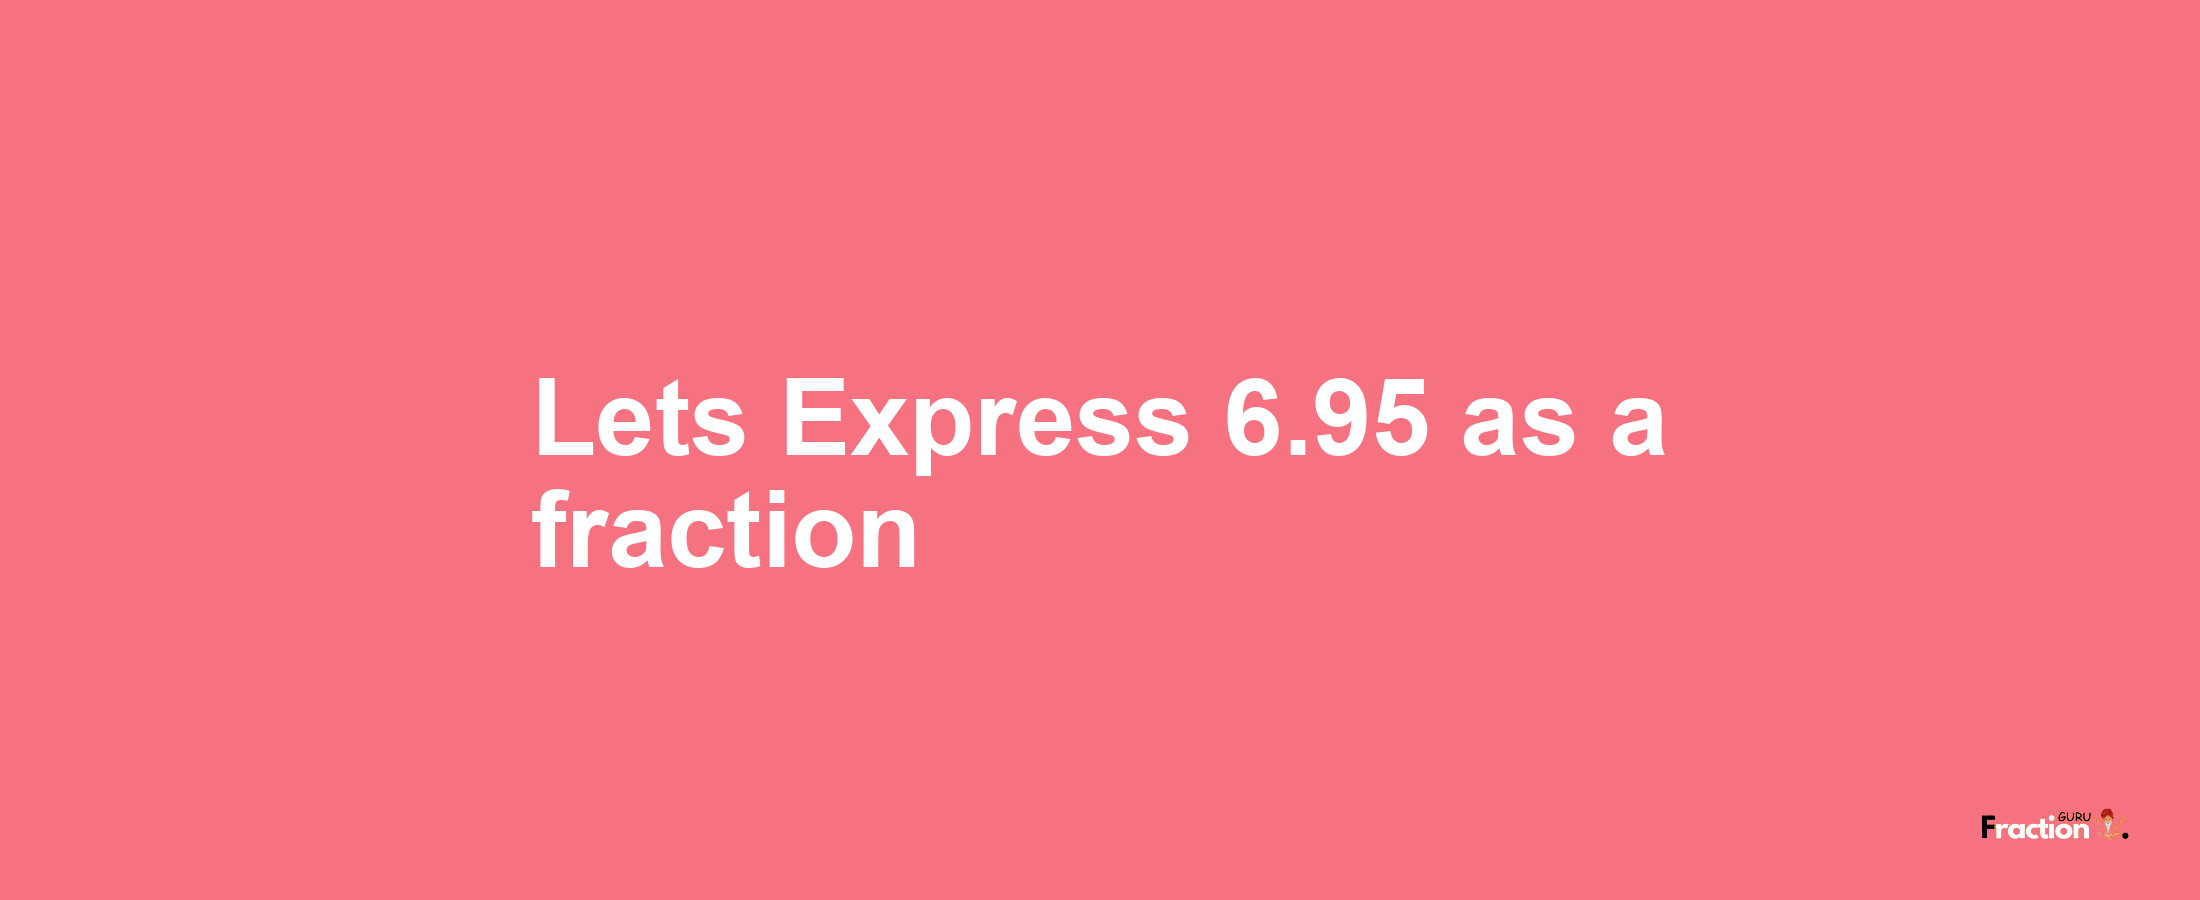 Lets Express 6.95 as afraction